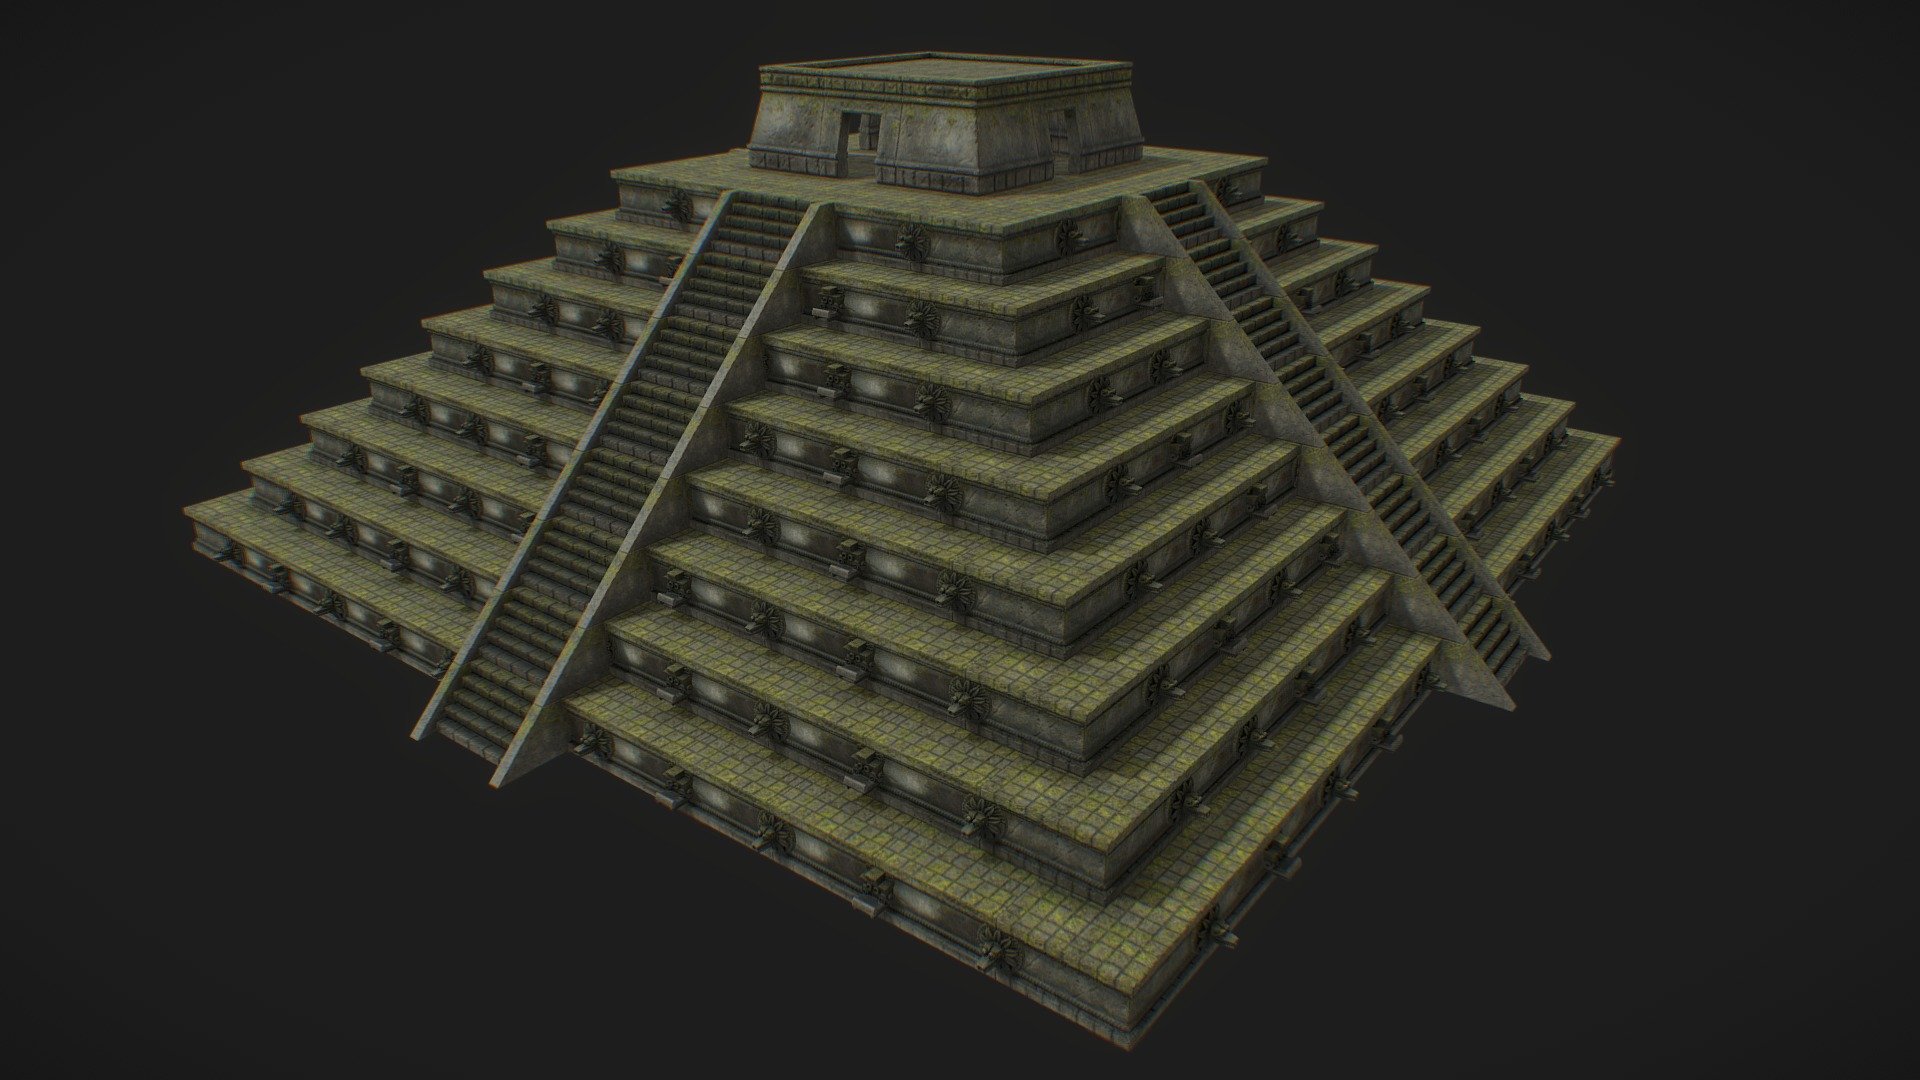 Standared-pyramid - 3D model by Micltan: The Game - An Ancient Mythical ...